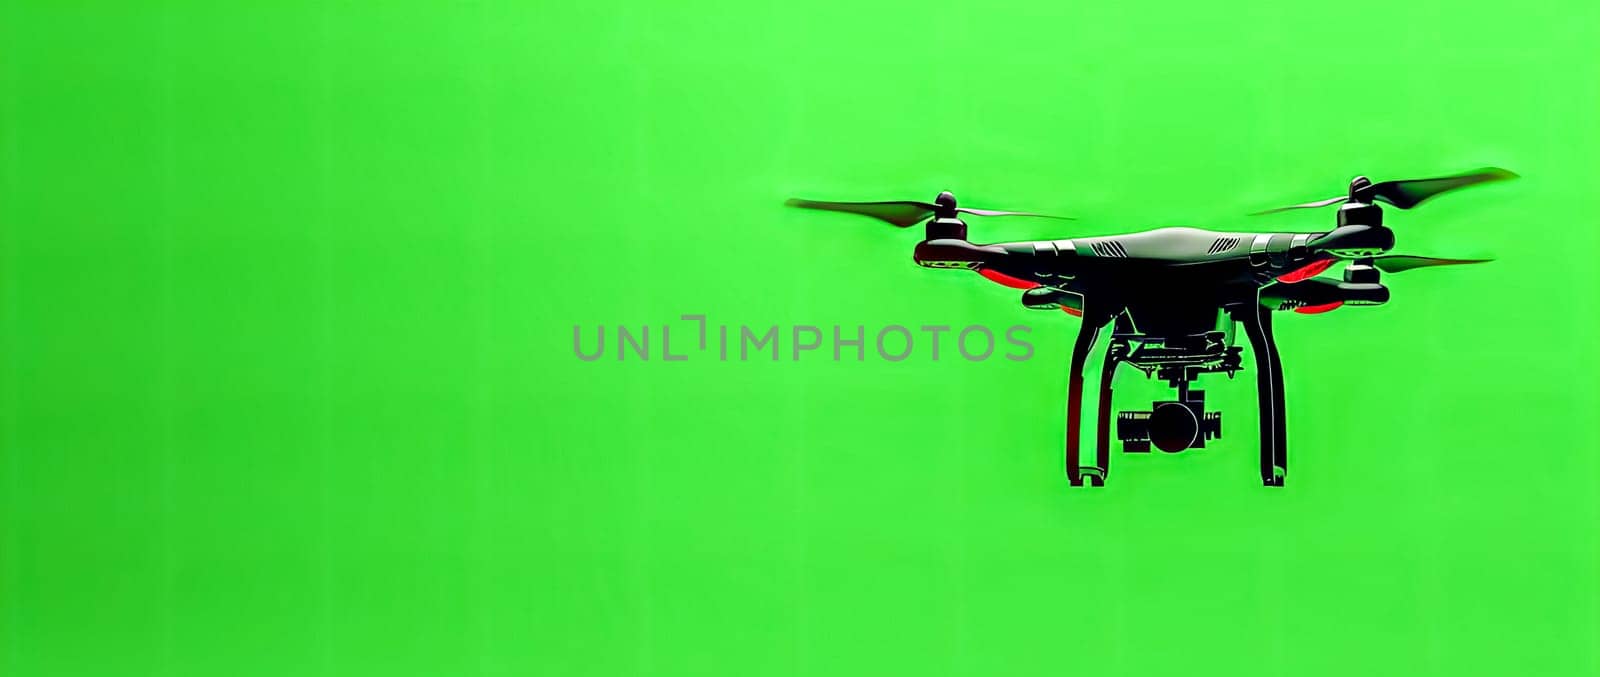 A drone is soaring above a grassland on a green screen, capturing the vibrant colors of the electric blue sky and lush green grass below